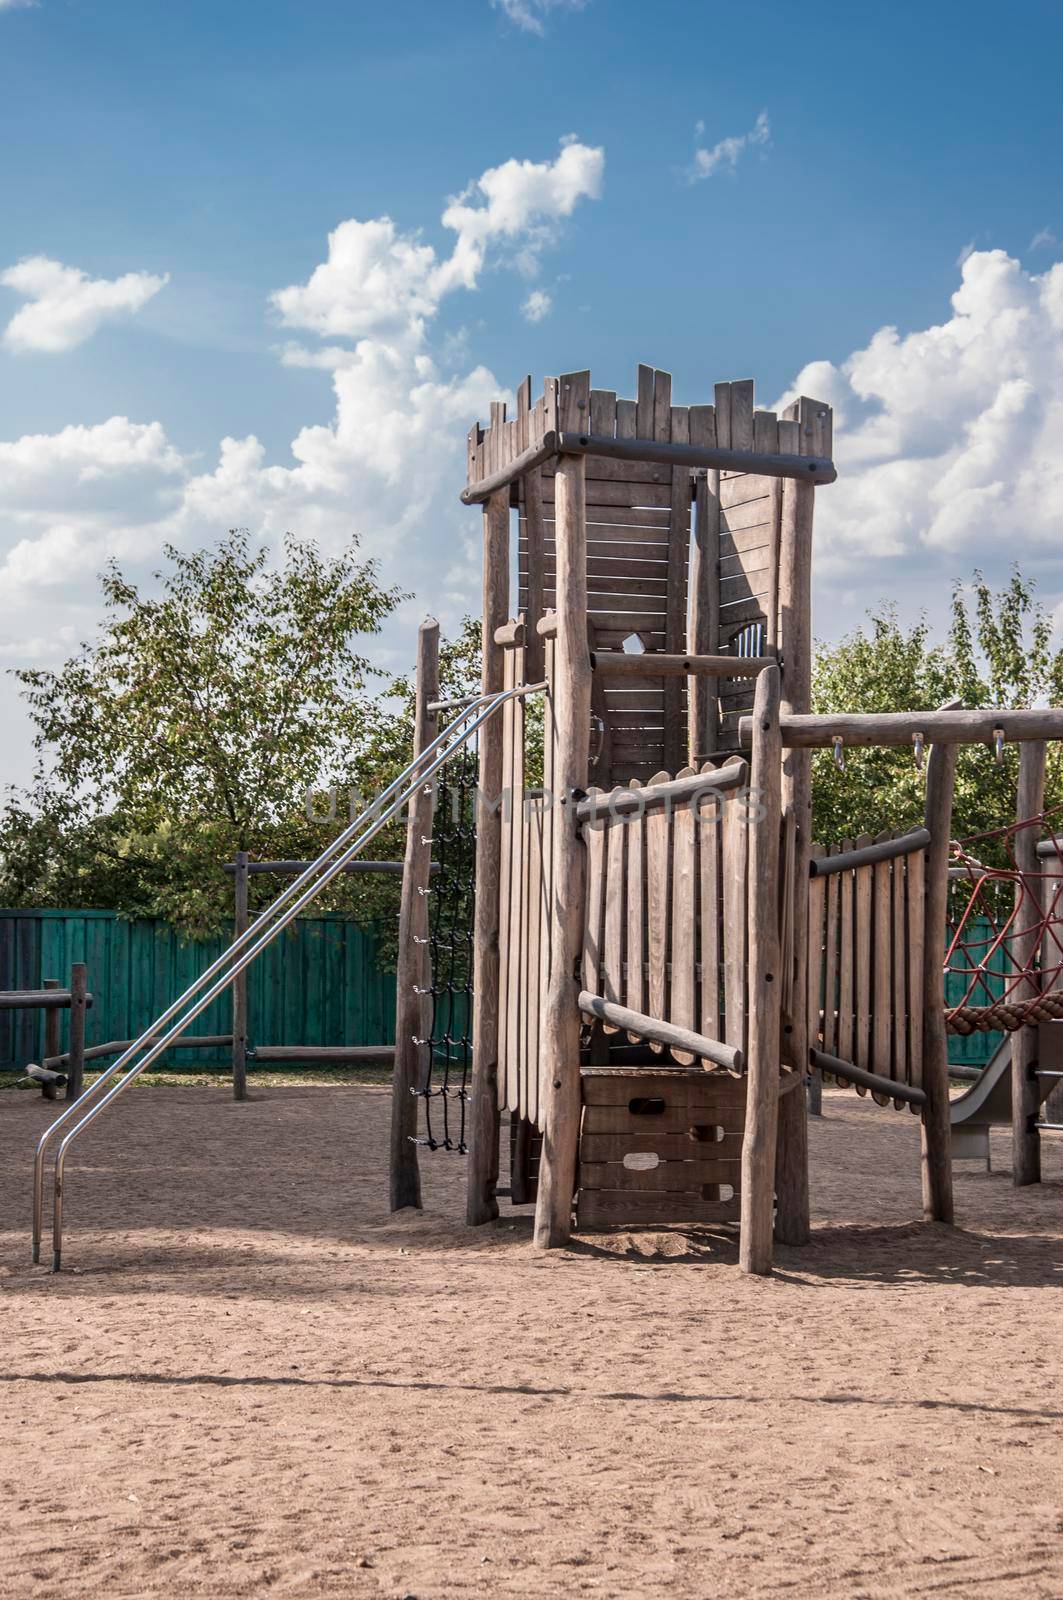 Empty old wood playground in summer day with blue sky and clouds